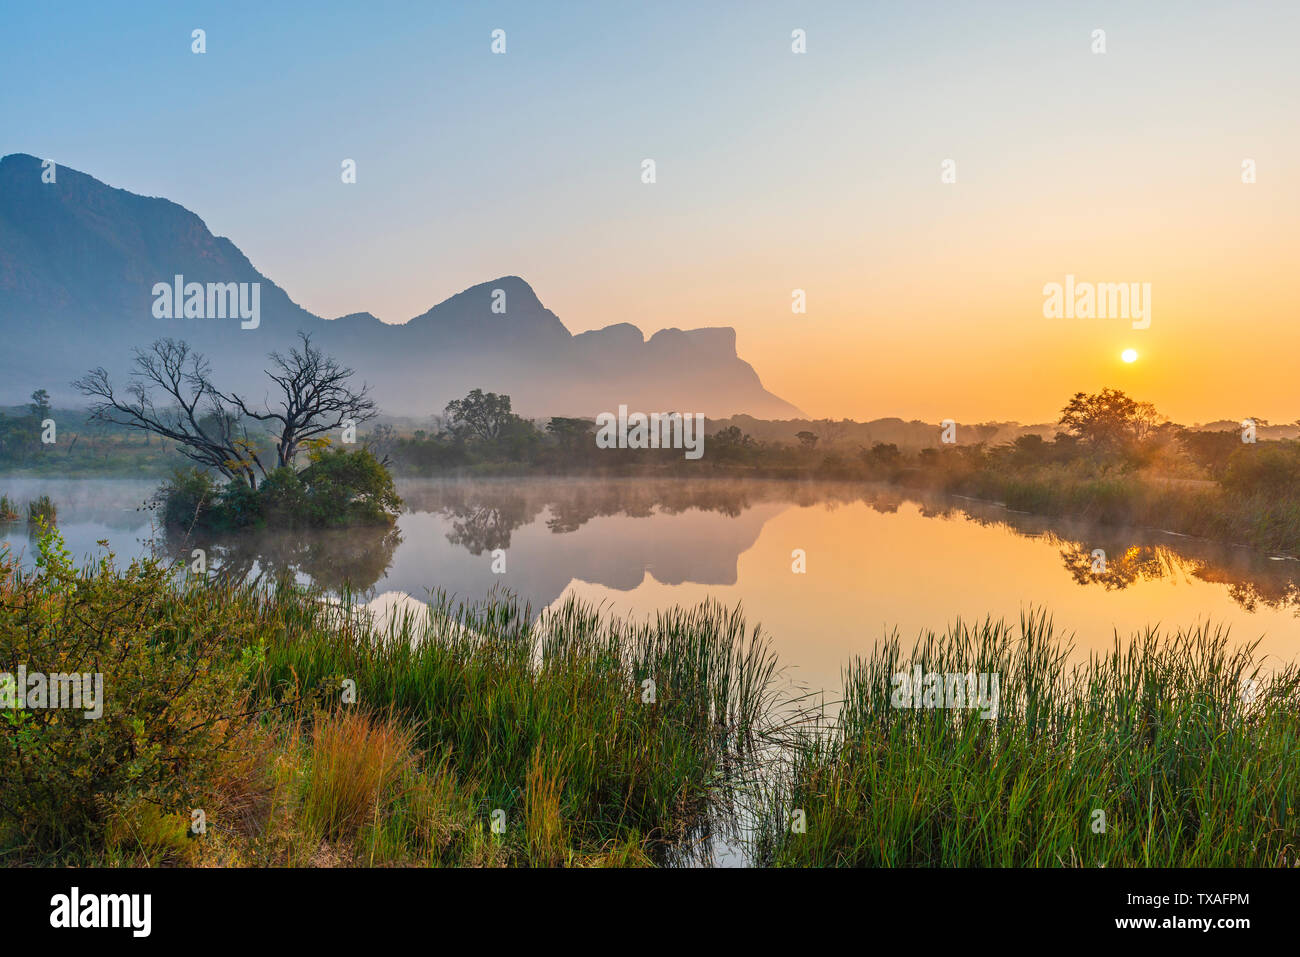 Landscape of a pond at sunrise in the fog with the Hanglip or Hanging Lip mountain peak, Entabeni Safari Game Reserve, Limpopo Province, South Africa. Stock Photo